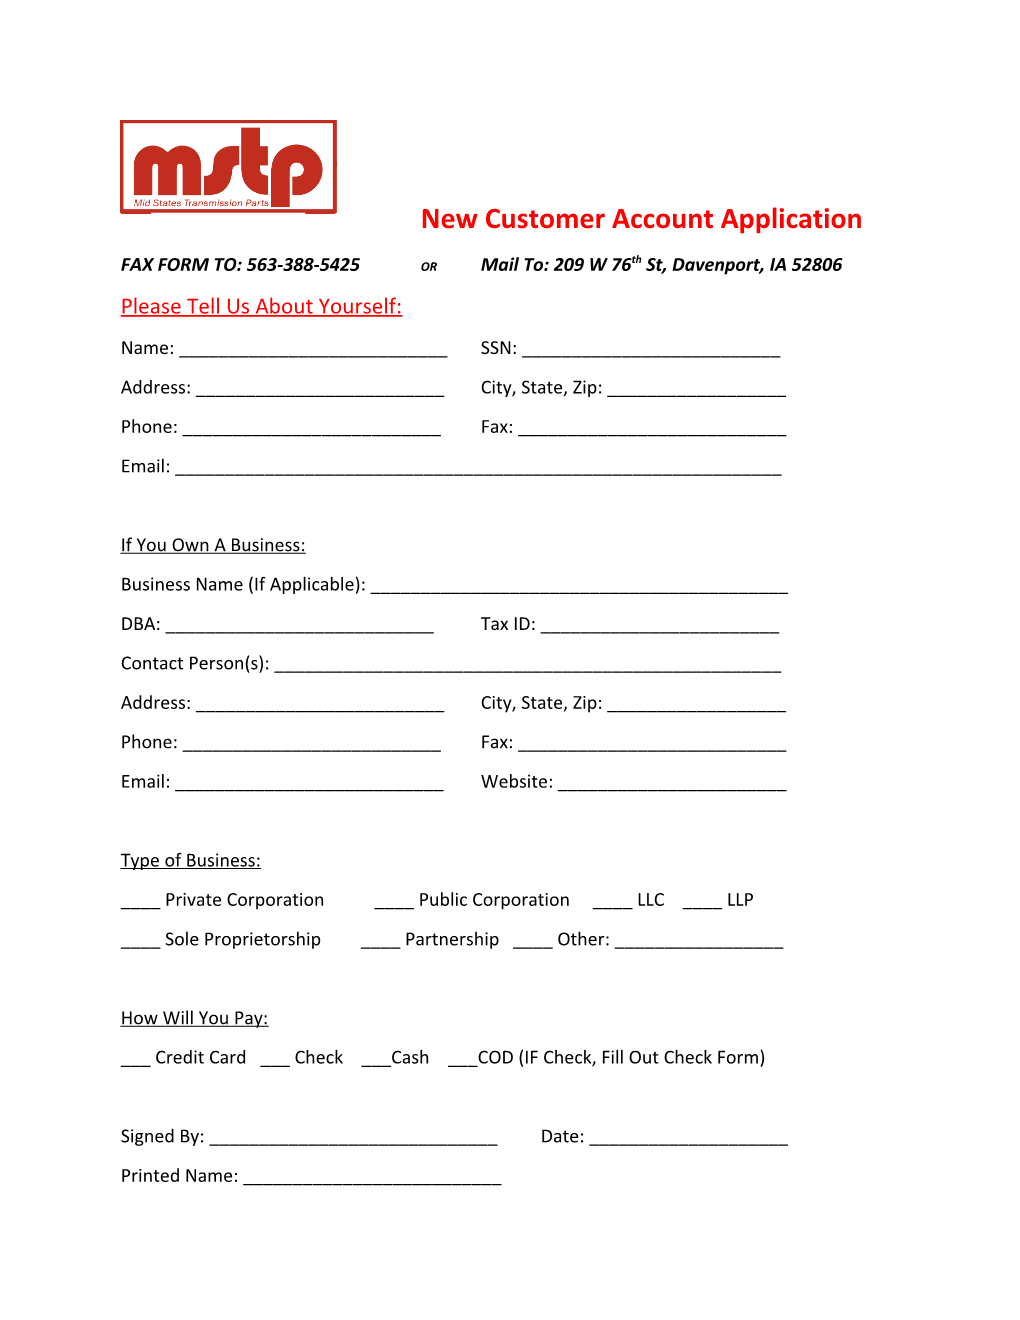 FAX FORM TO: 563-388-5425 Ormail To: 209 W 76Th St, Davenport, IA 52806